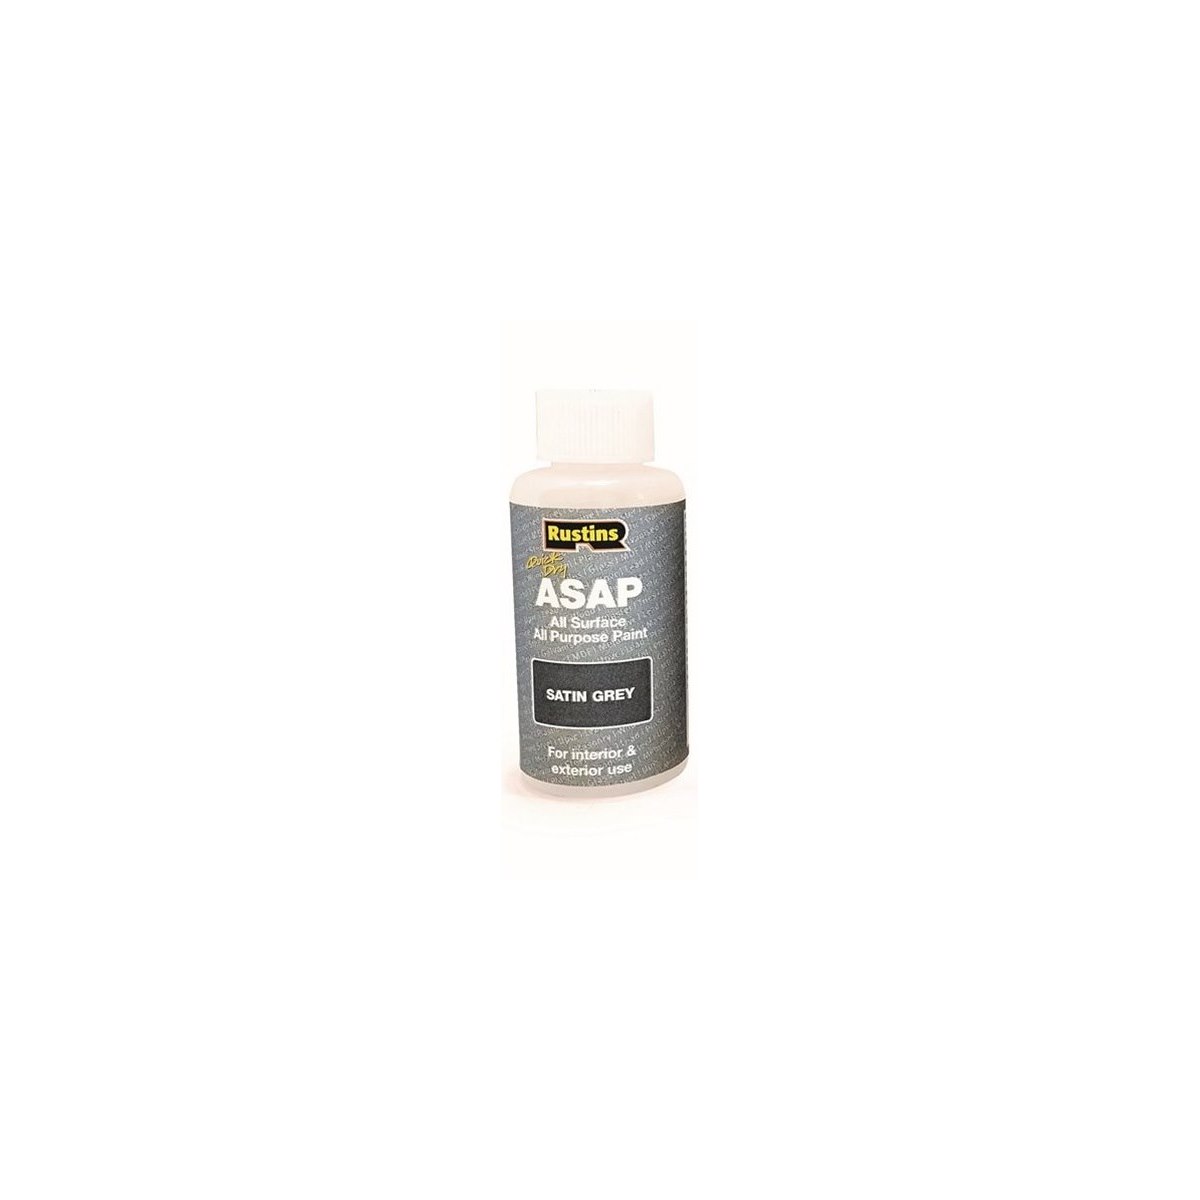 Rustins Quick Dry All Surface All Purpose Paint (ASAP) Grey 50ml